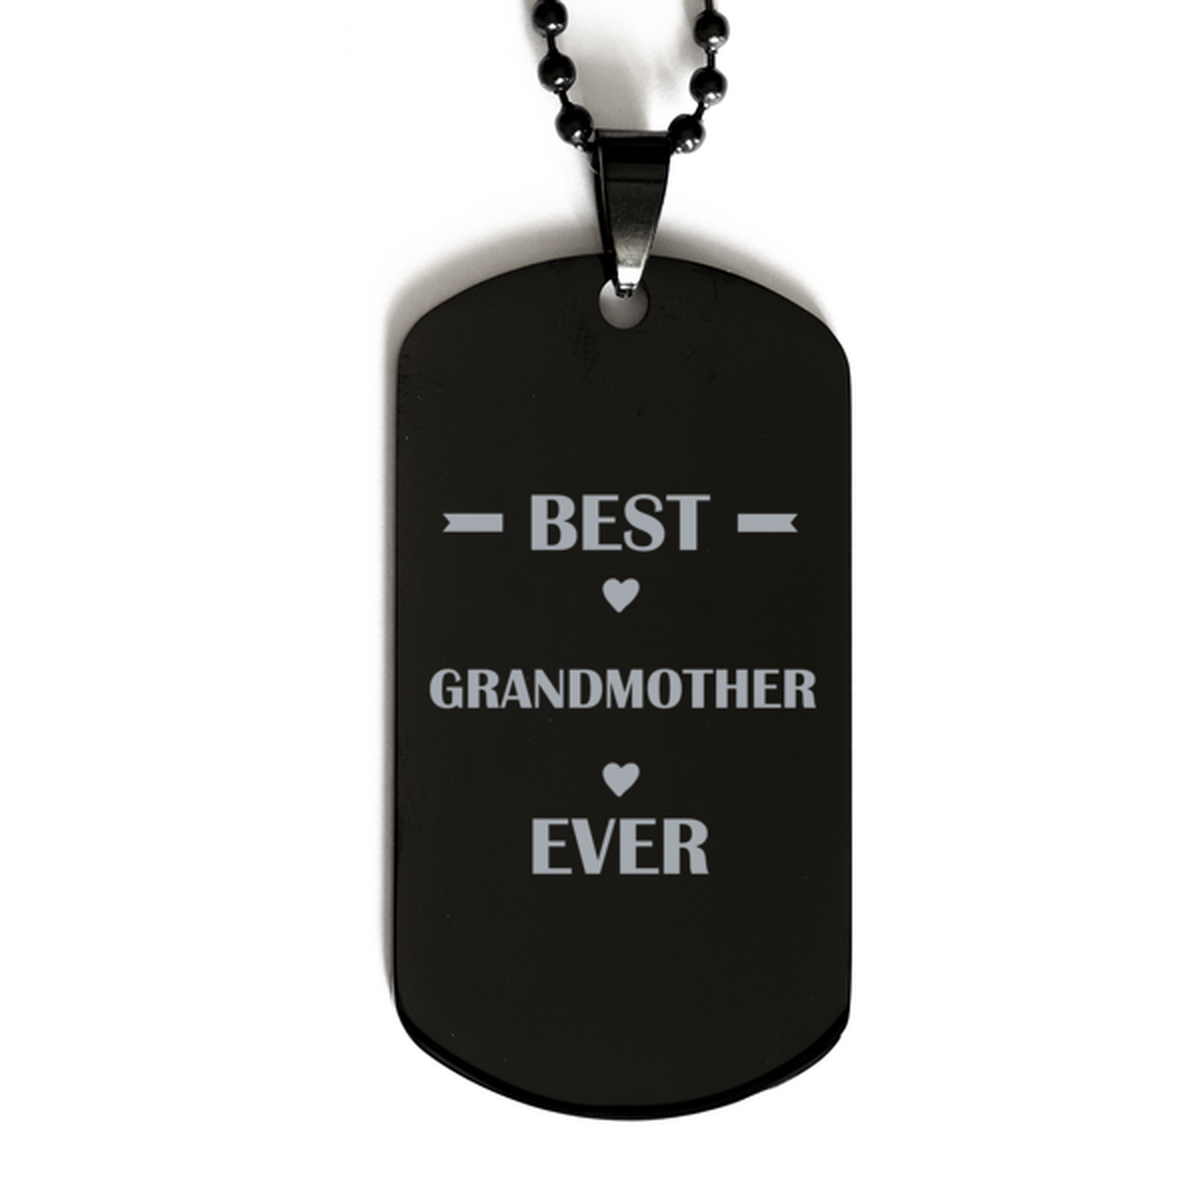 Best Grandmother Ever Grandmother Gifts, Funny Black Dog Tag For Grandmother, Birthday Family Presents Engraved Necklace For Women